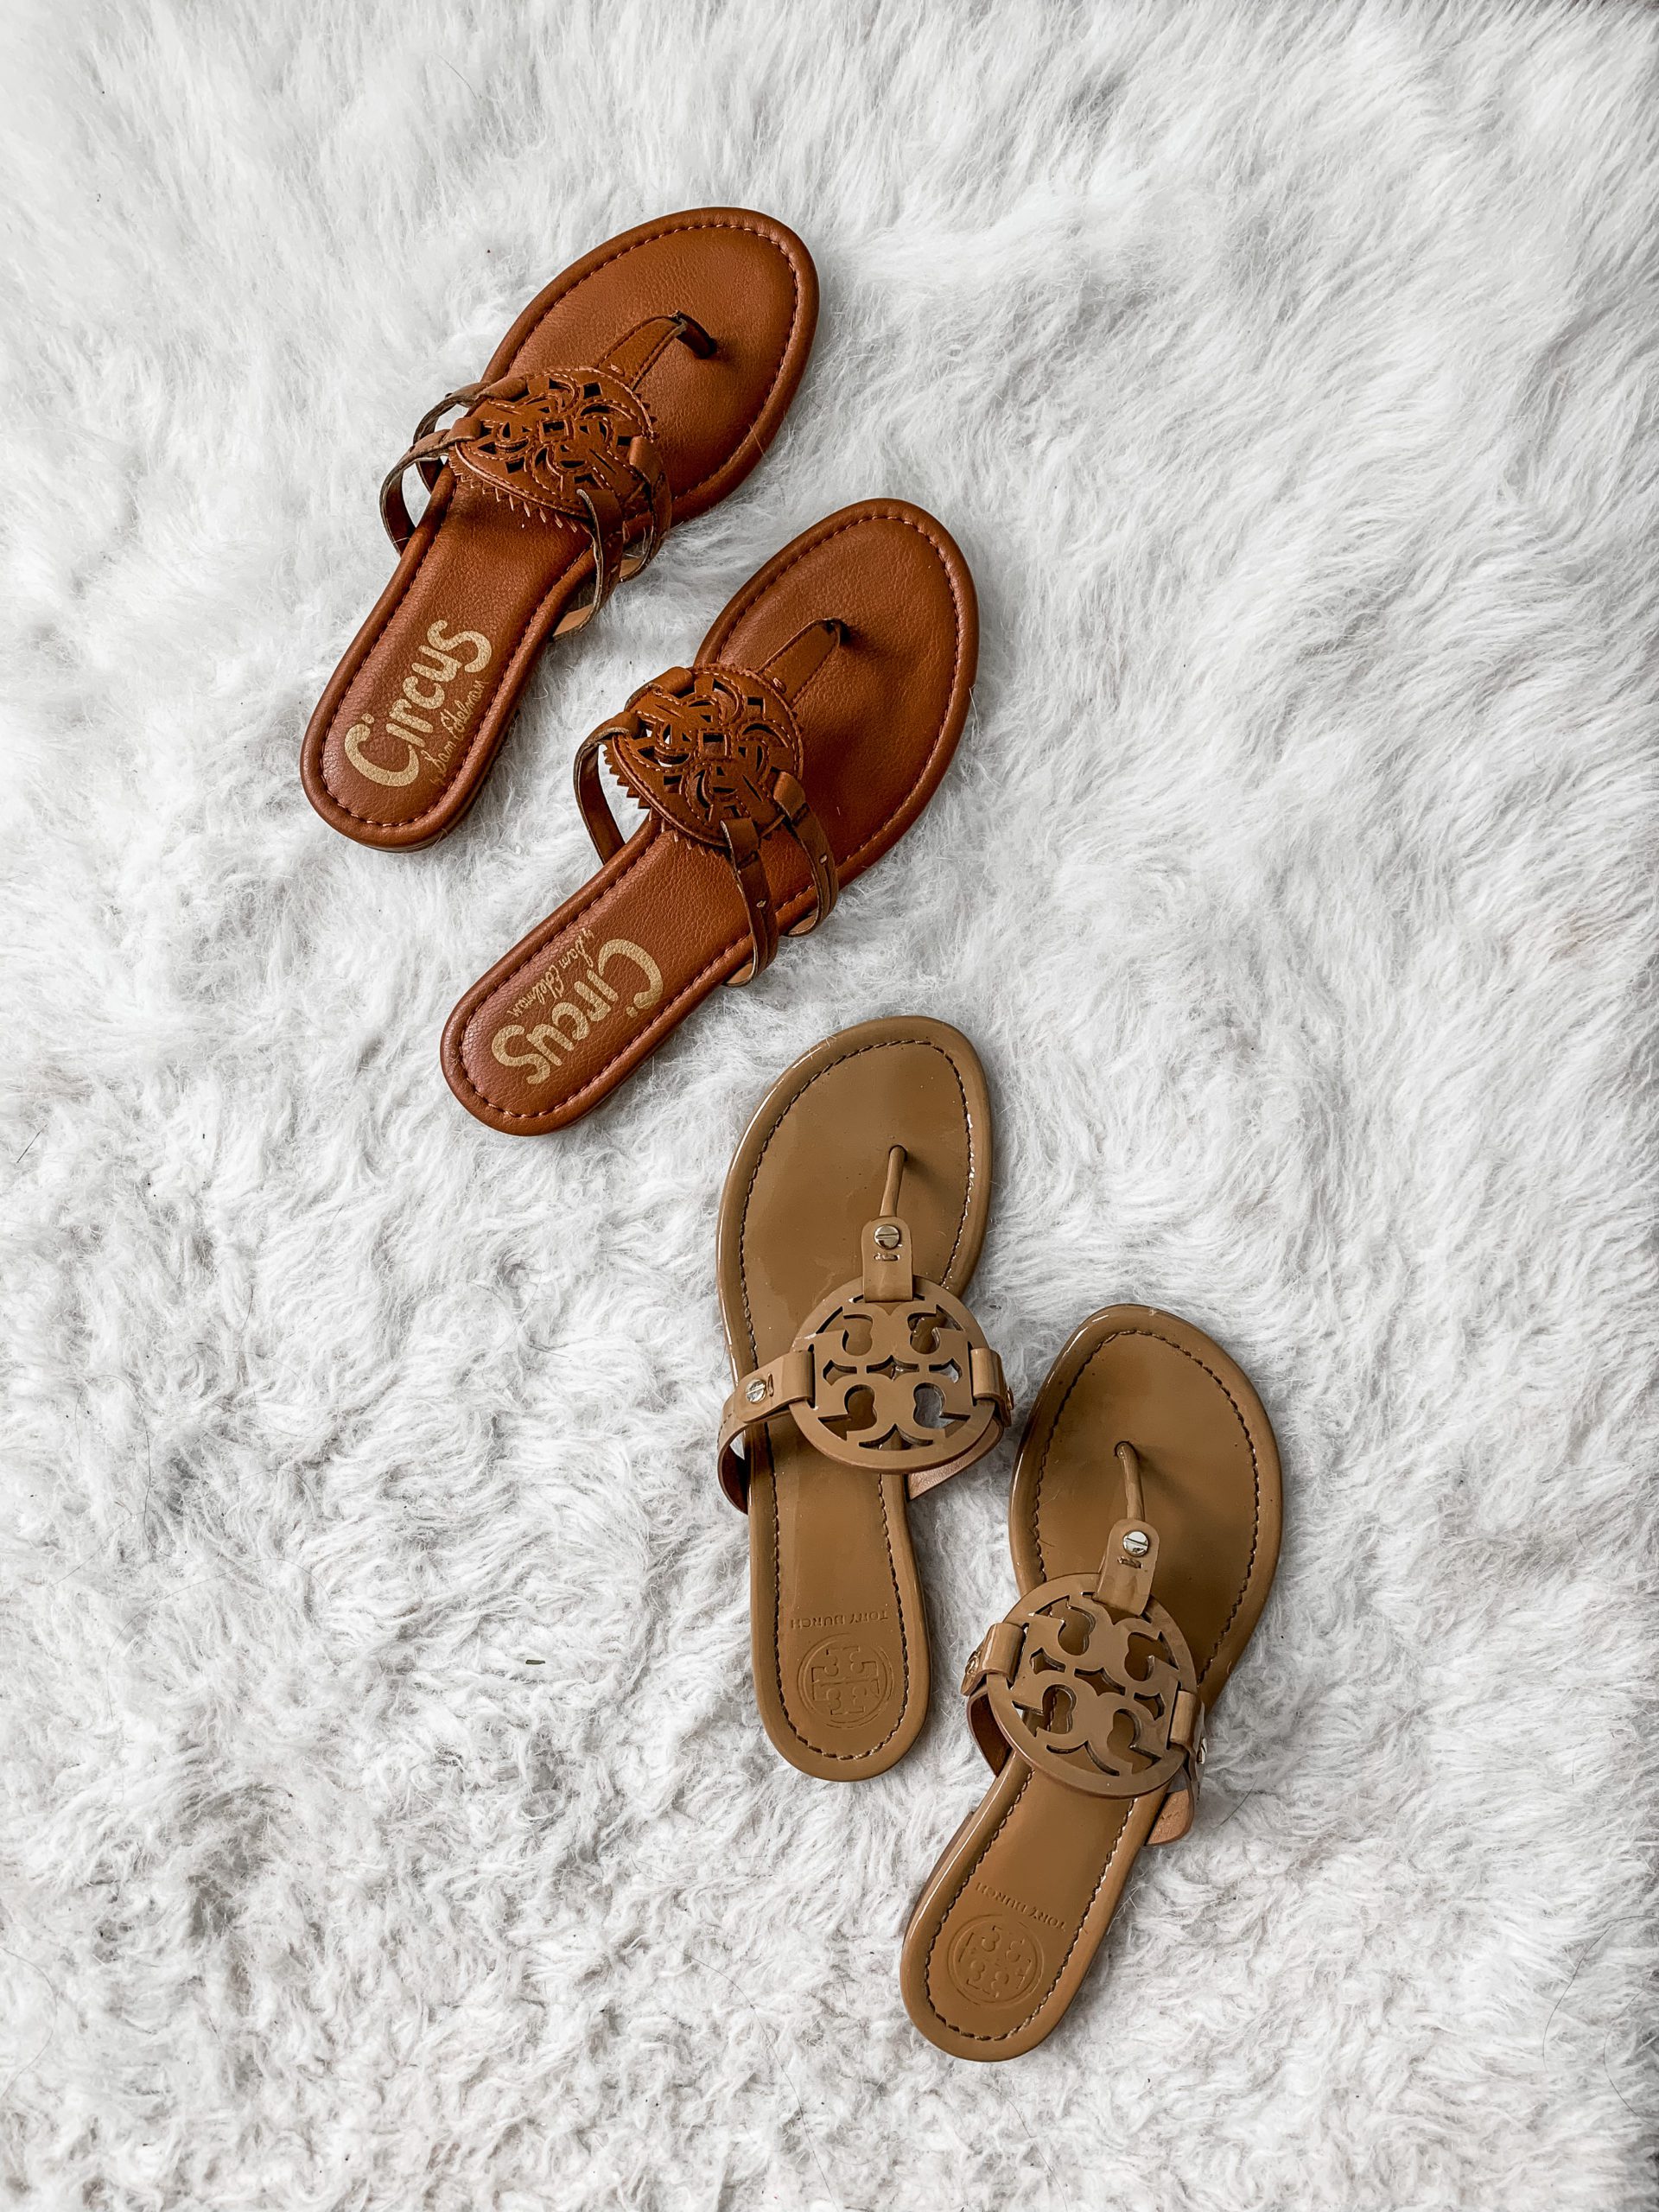 LOOK FOR LESS: Tory Burch Miller Sandals ($198 vs. $30)